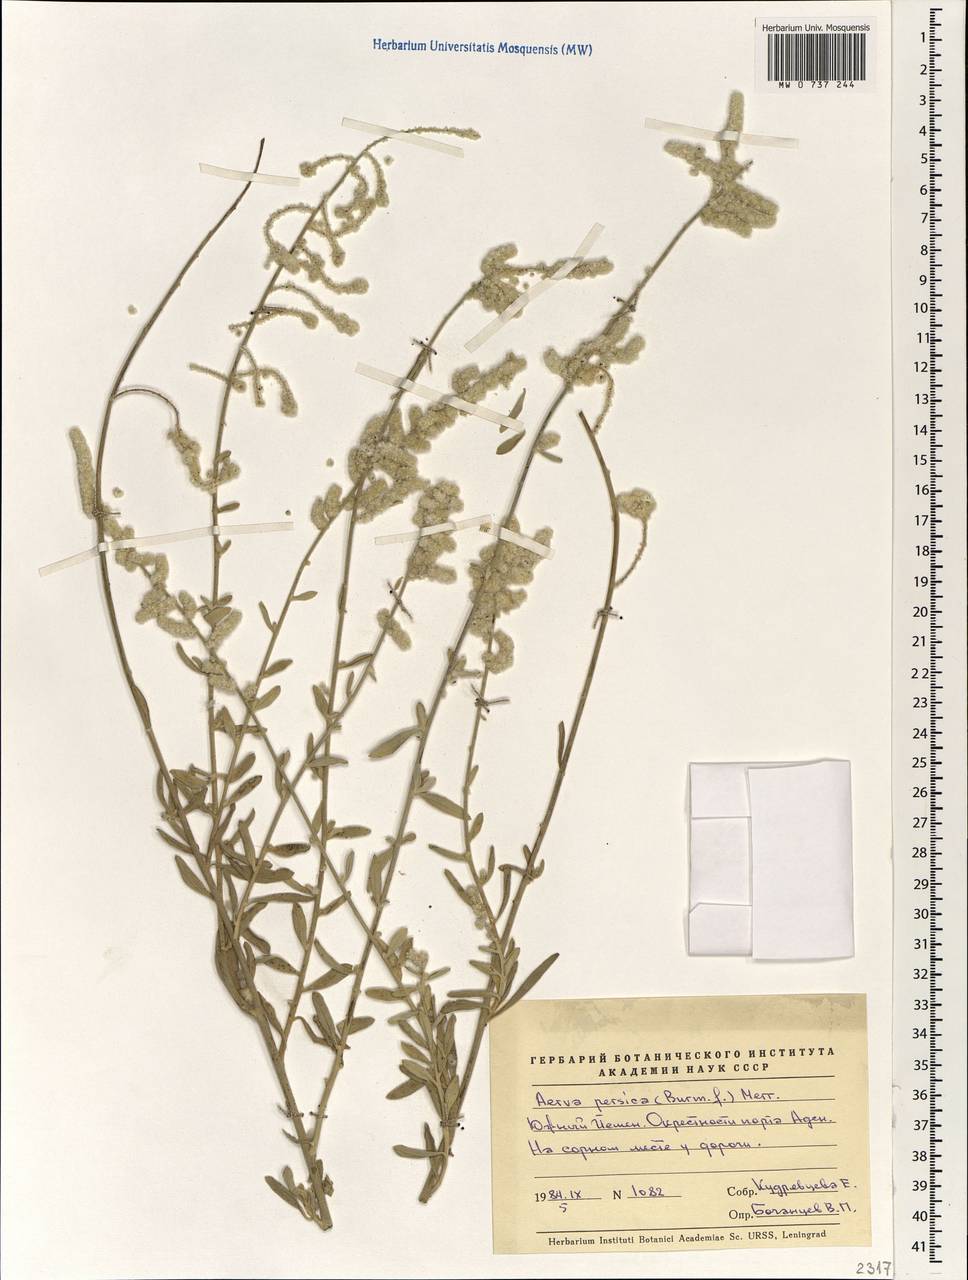 Aerva javanica (Burm. f.) Juss. ex Schult., South Asia, South Asia (Asia outside ex-Soviet states and Mongolia) (ASIA) (Yemen)